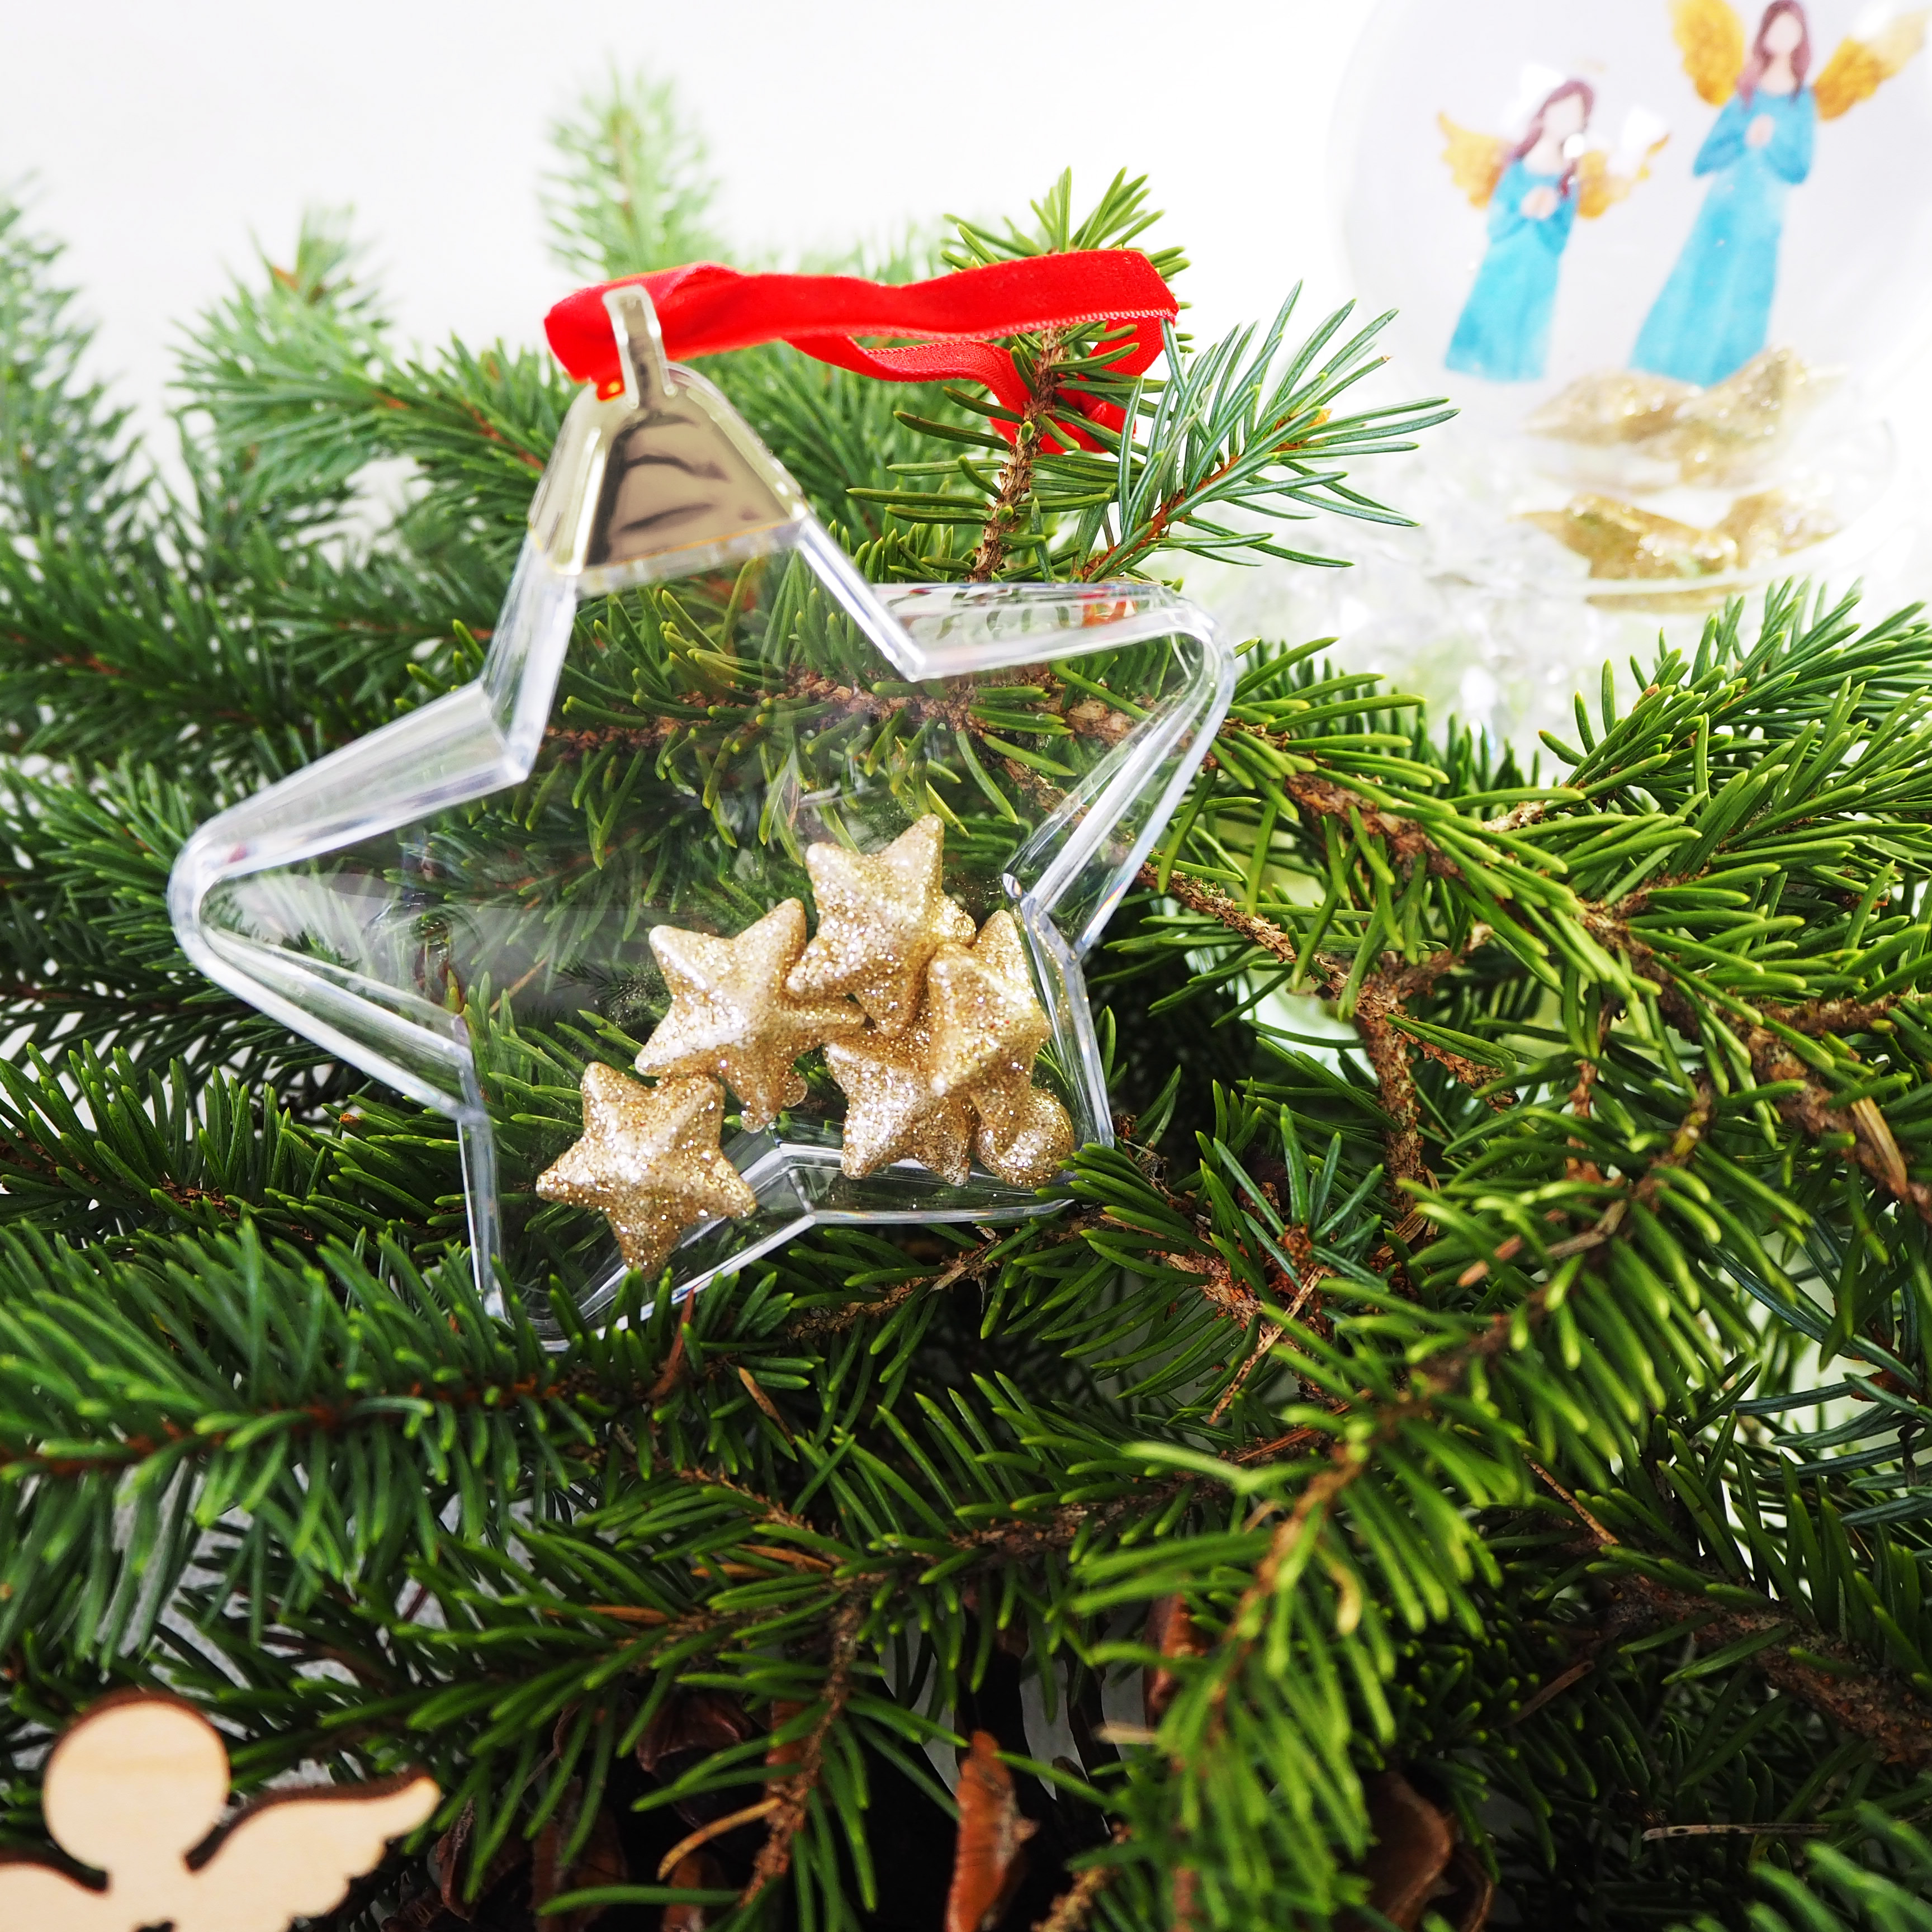 Photo Christmas bauble with red ribbon and silver cap - star